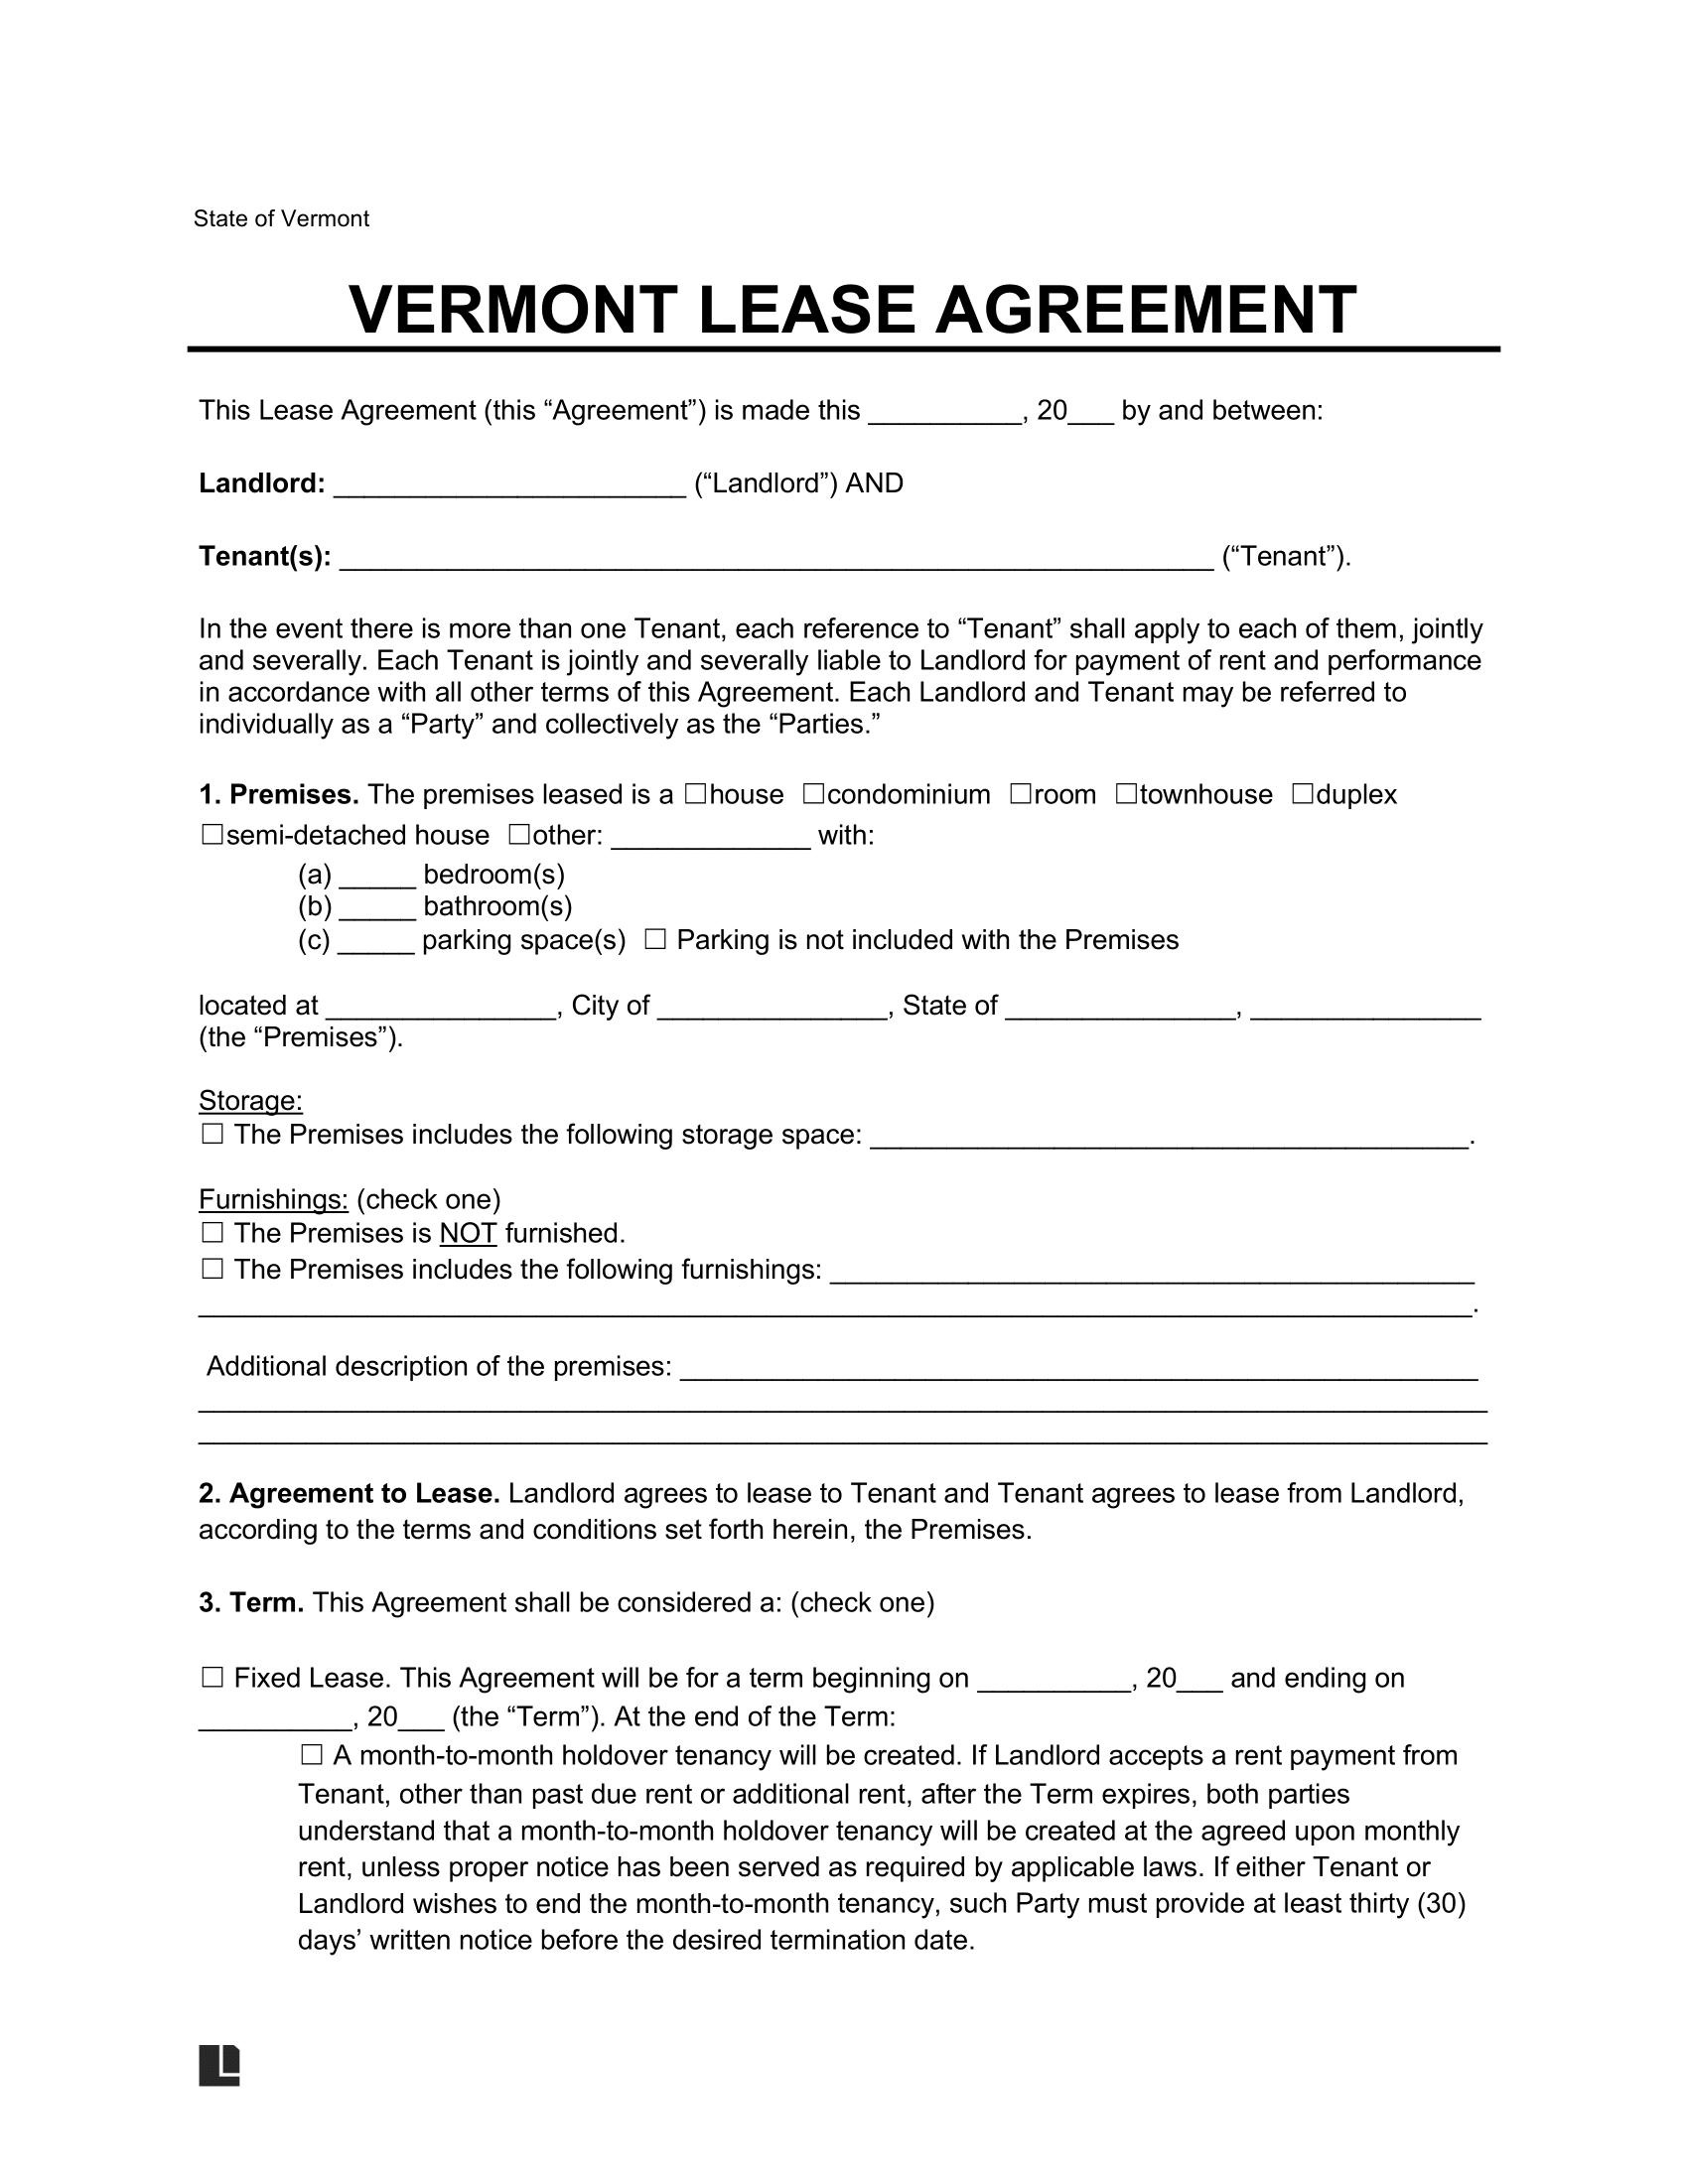 Vermont Lease Agreement Template